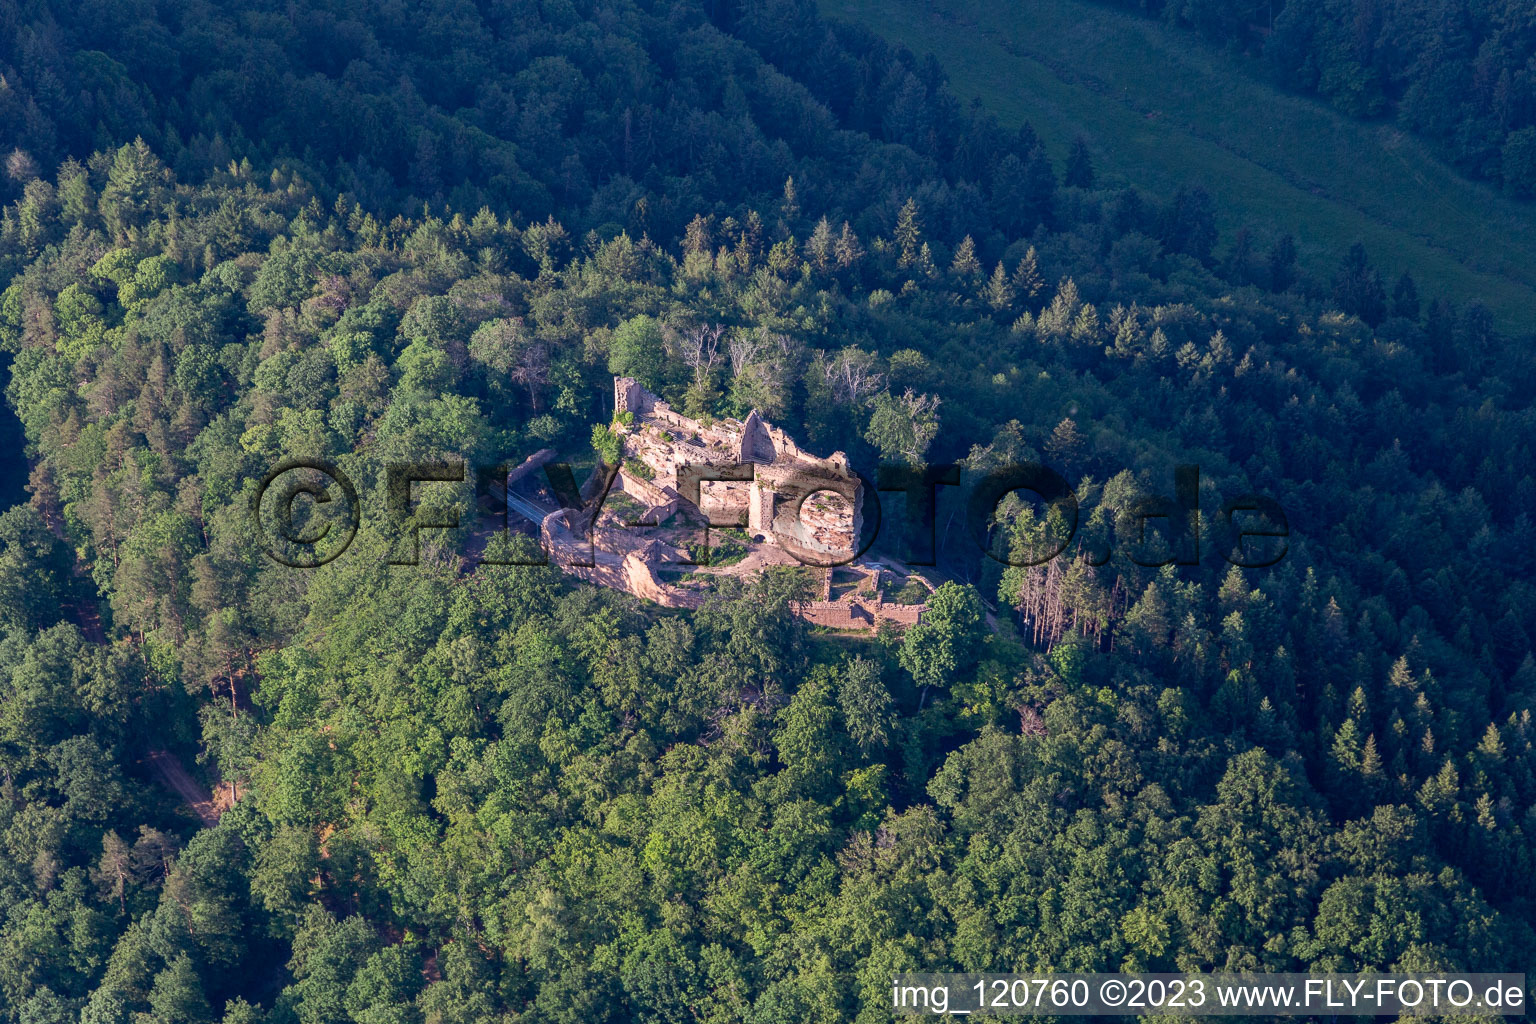 Aerial photograpy of Ruins and vestiges of the former castle and fortress Burg Meistersel in Ramberg in the state Rhineland-Palatinate, Germany